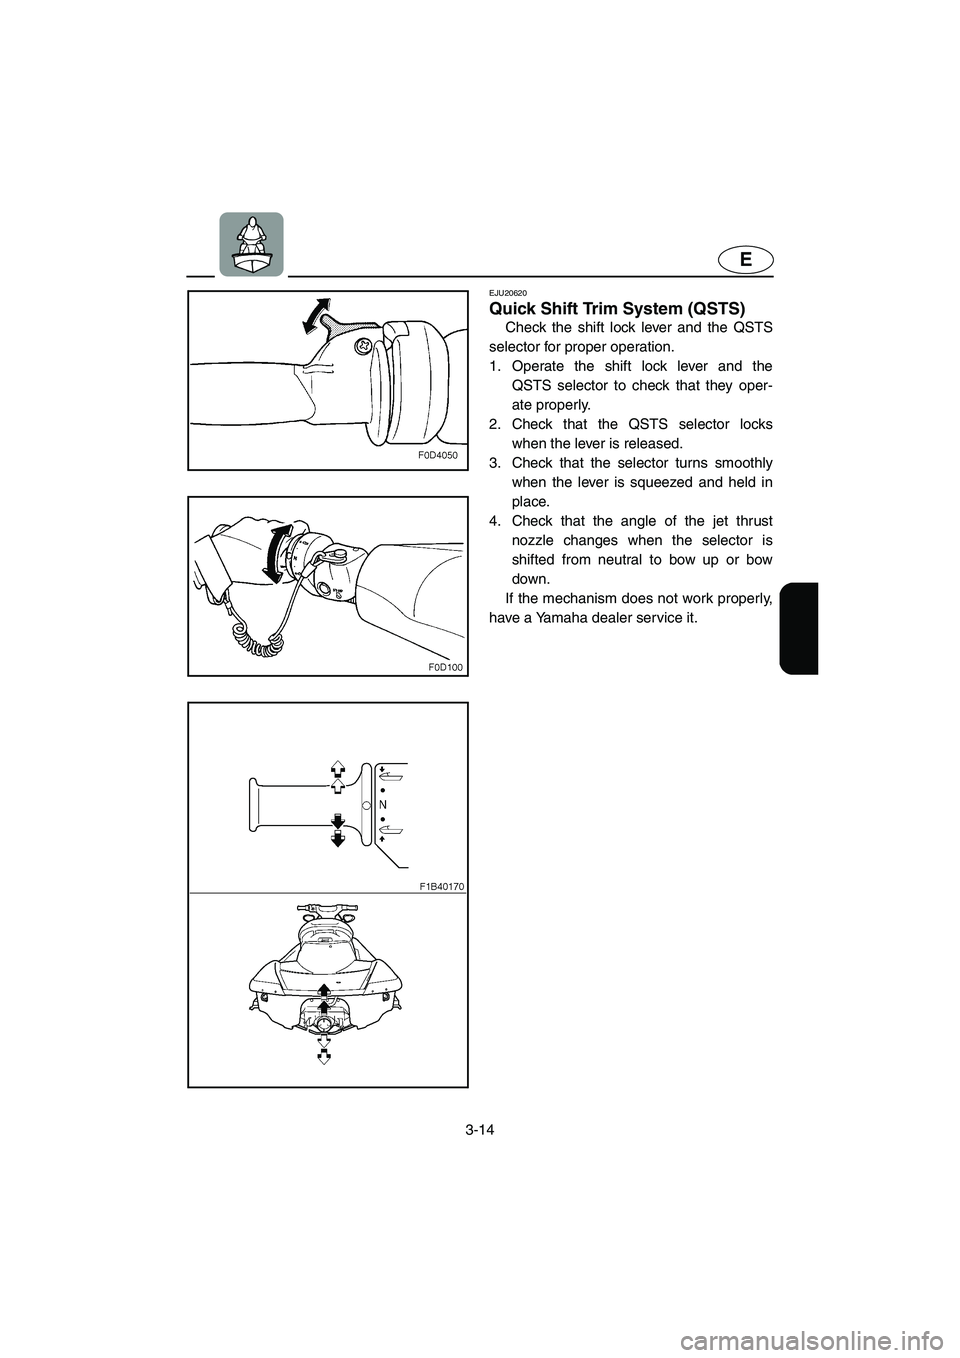 YAMAHA FX HO 2006  Owners Manual 3-14
E
EJU20620 
Quick Shift Trim System (QSTS) 
Check the shift lock lever and the QSTS
selector for proper operation. 
1. Operate the shift lock lever and the
QSTS selector to check that they oper-
